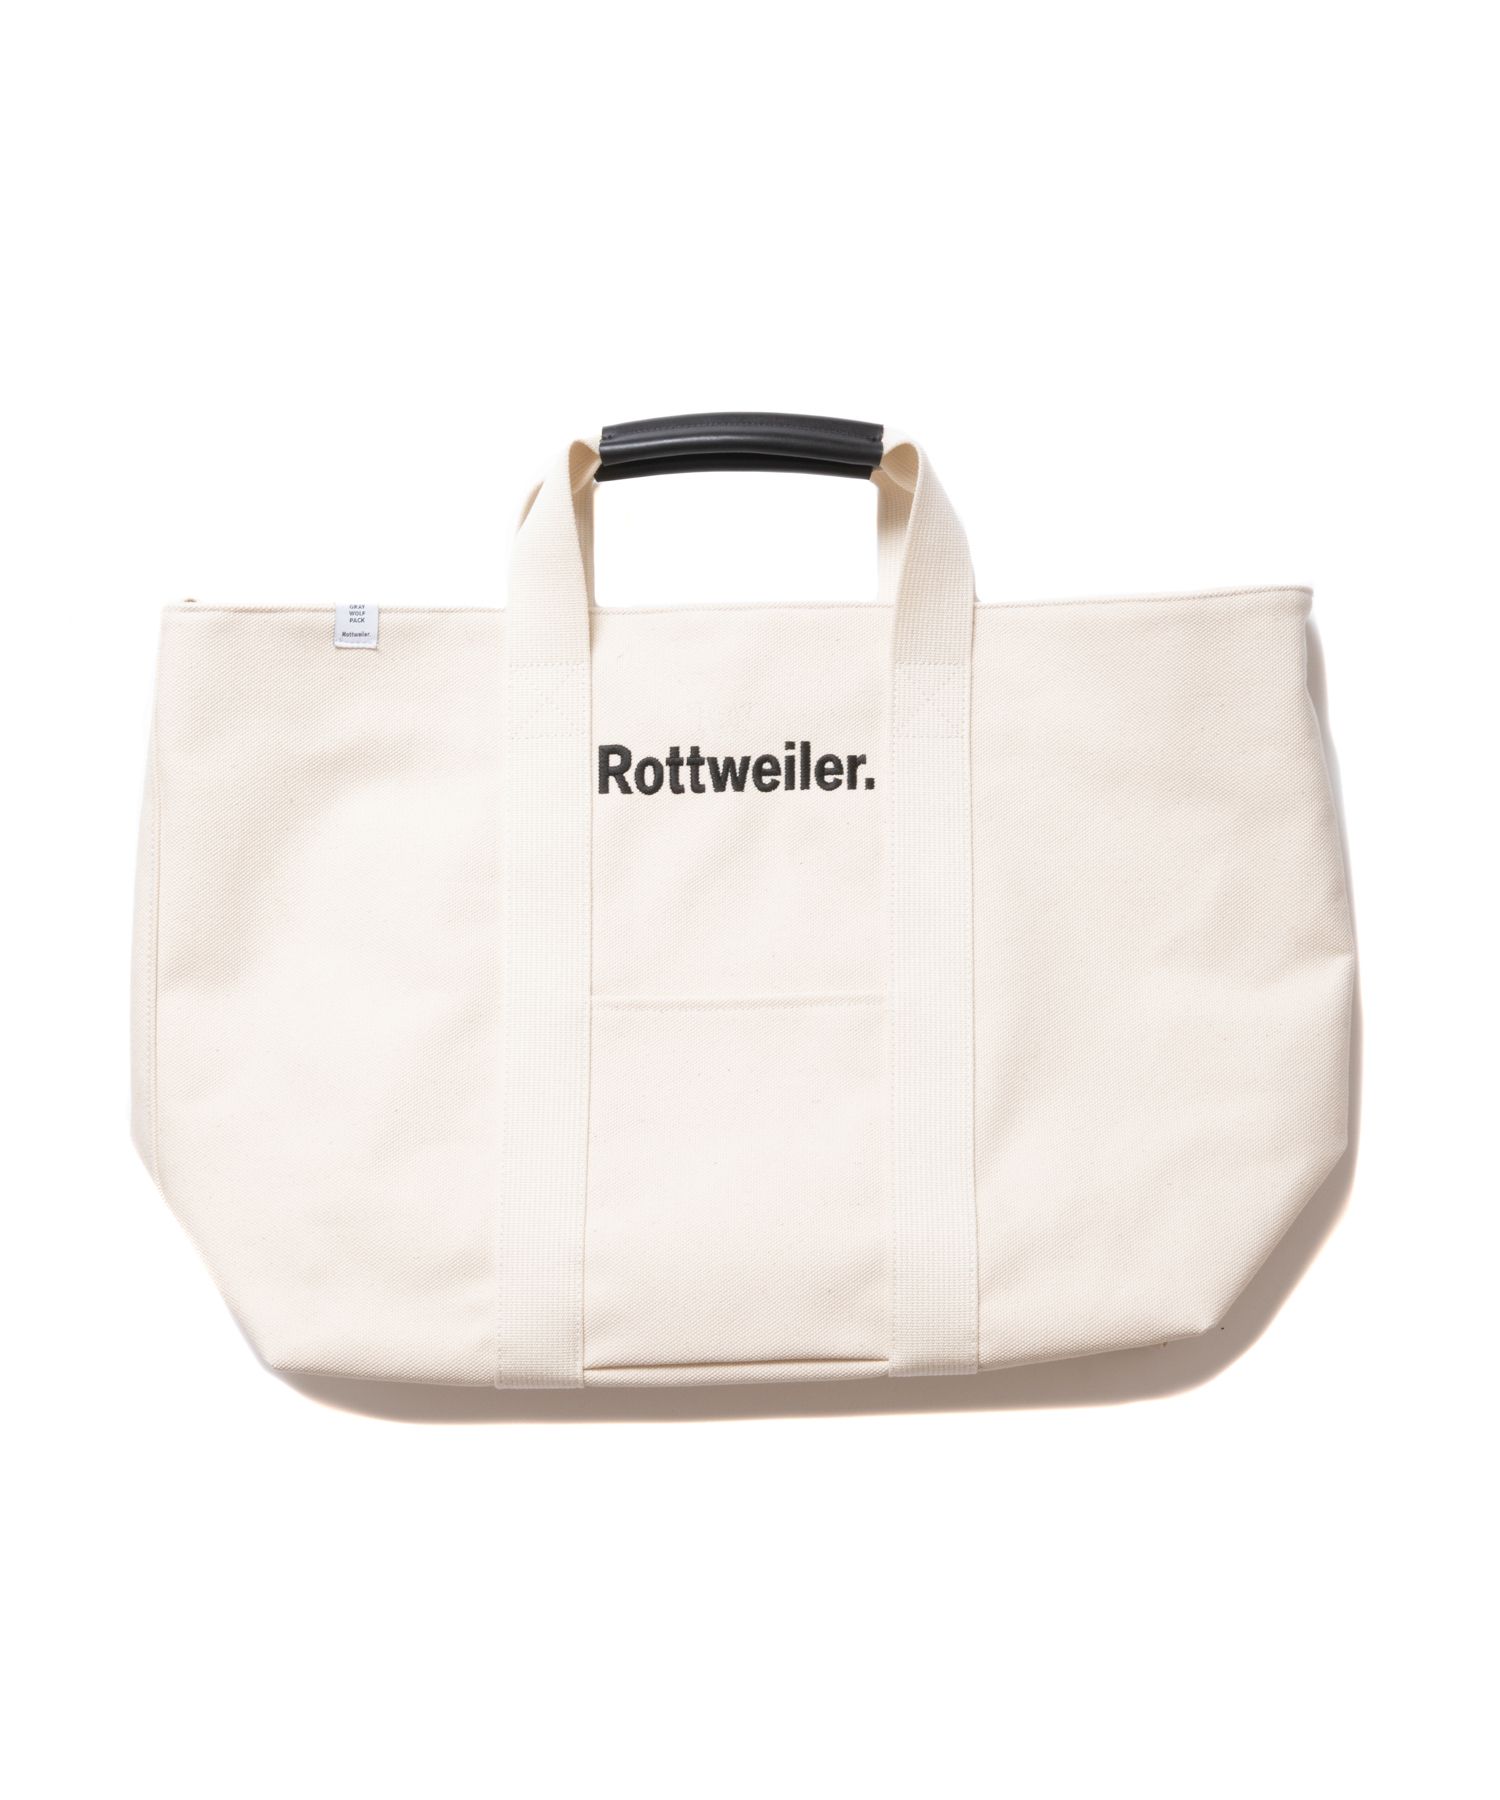 ROTTWEILER   CANVAS TOTE BAG LARGE WHITE / 定番キャンバストート